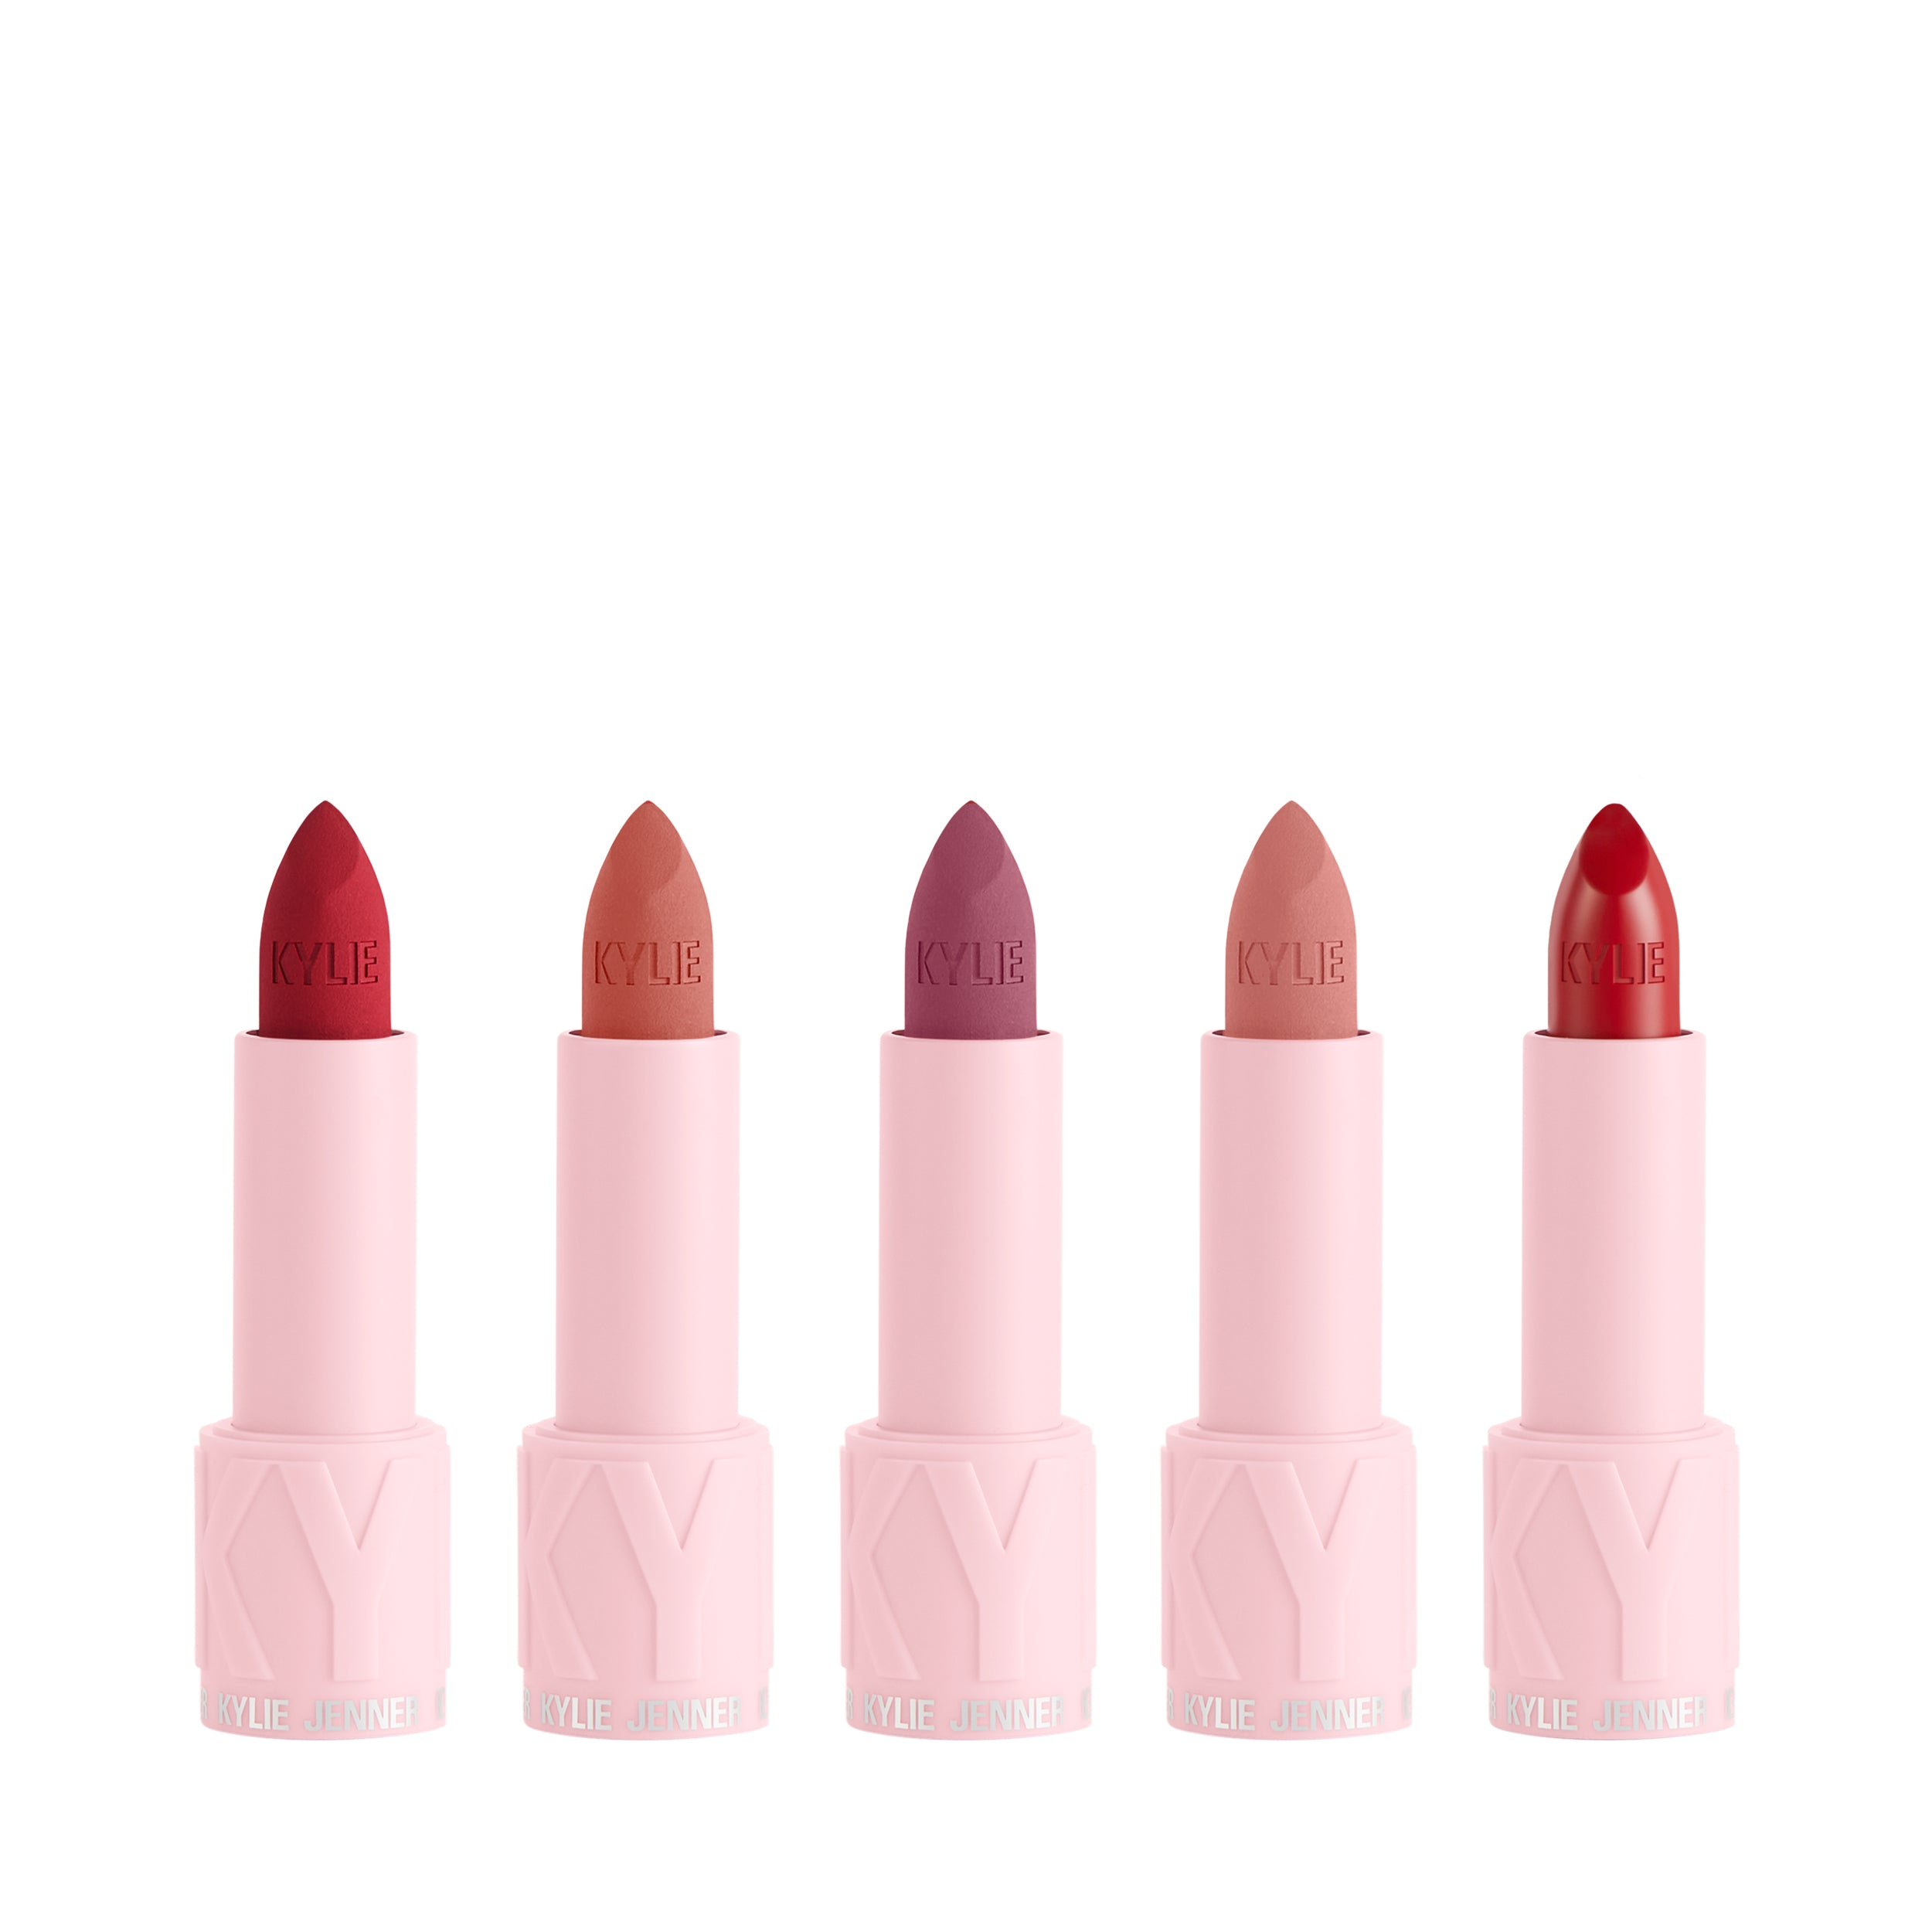 Buy Sugar and Spice Lipstick Online at Best Price - Iba